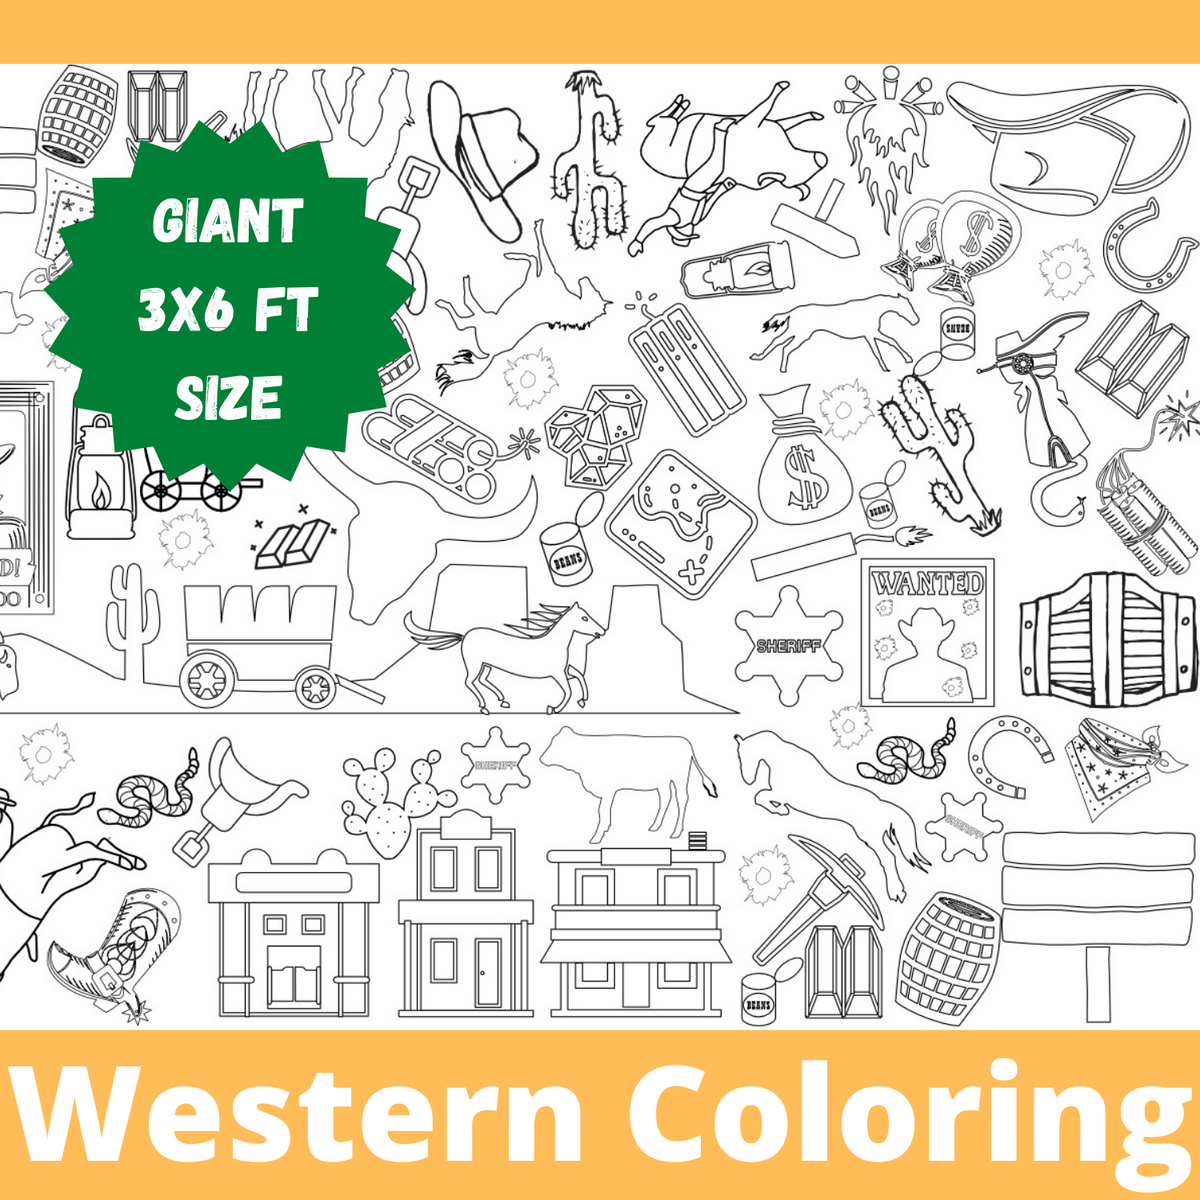 Western themed coloring table cover â creative crayons workshop